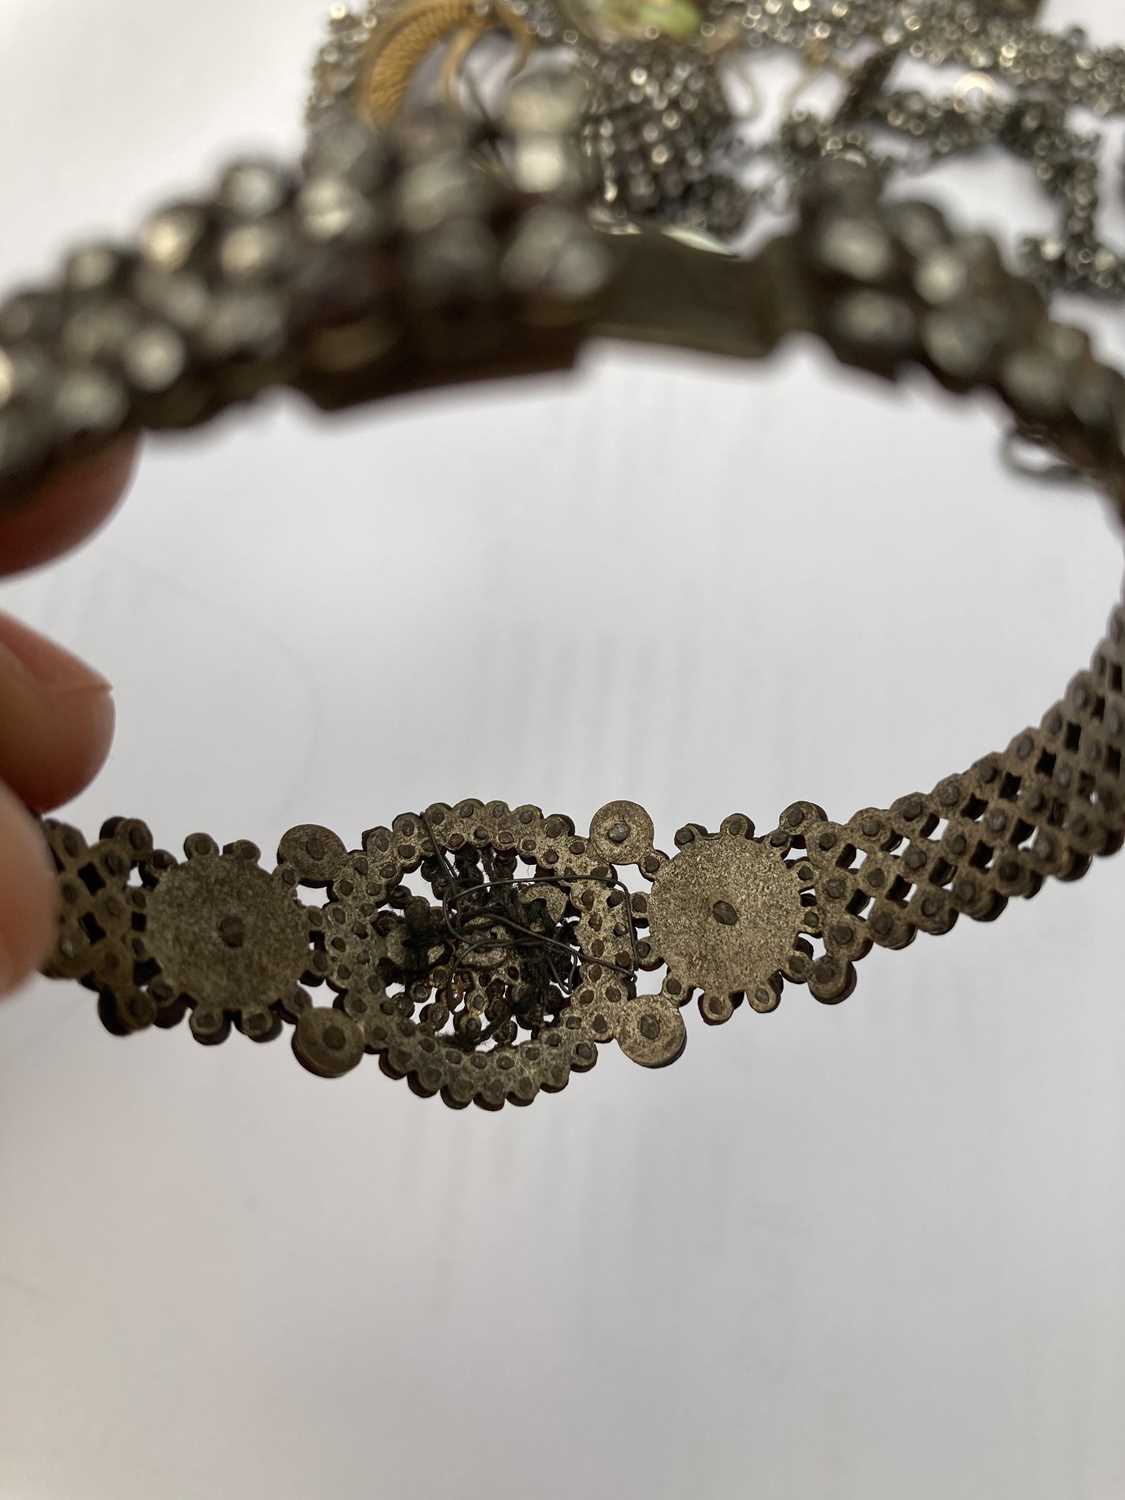 19th Century and Later Cut Steel Jewellery, comprising a decorative tiara with rotating flower heads - Image 5 of 19